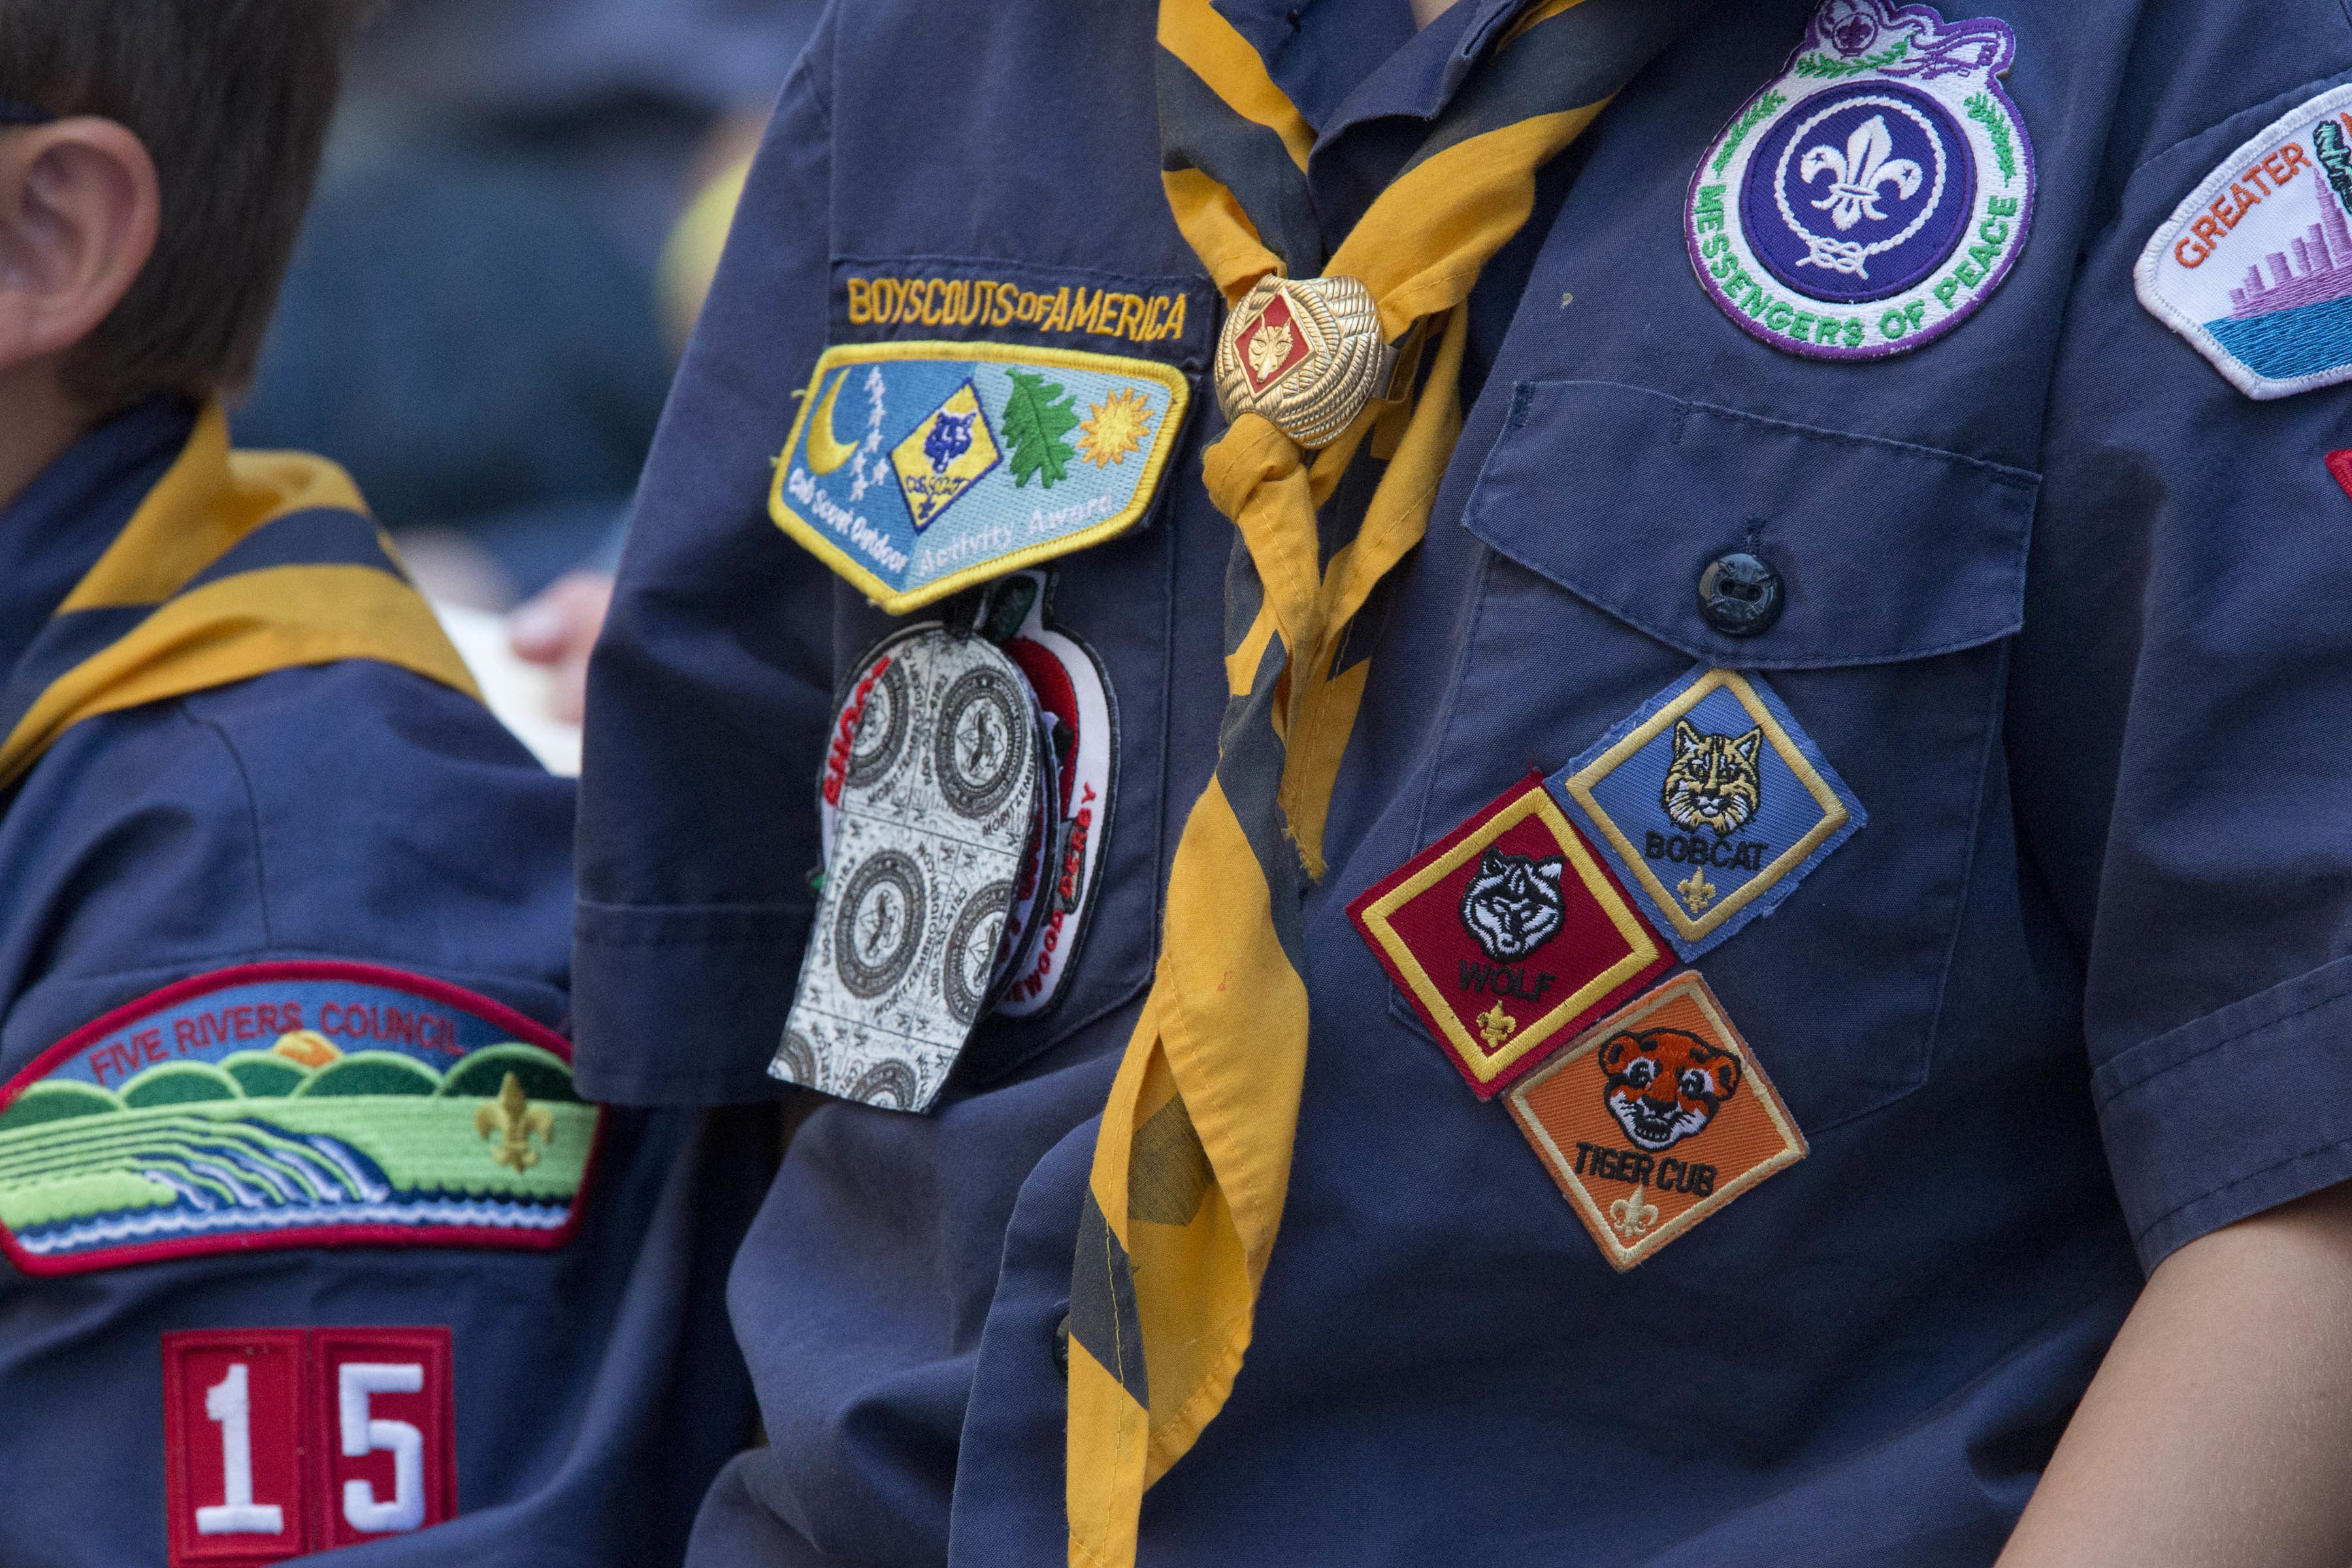 Potentially toxic lead content in Boy Scouts uniform accessory